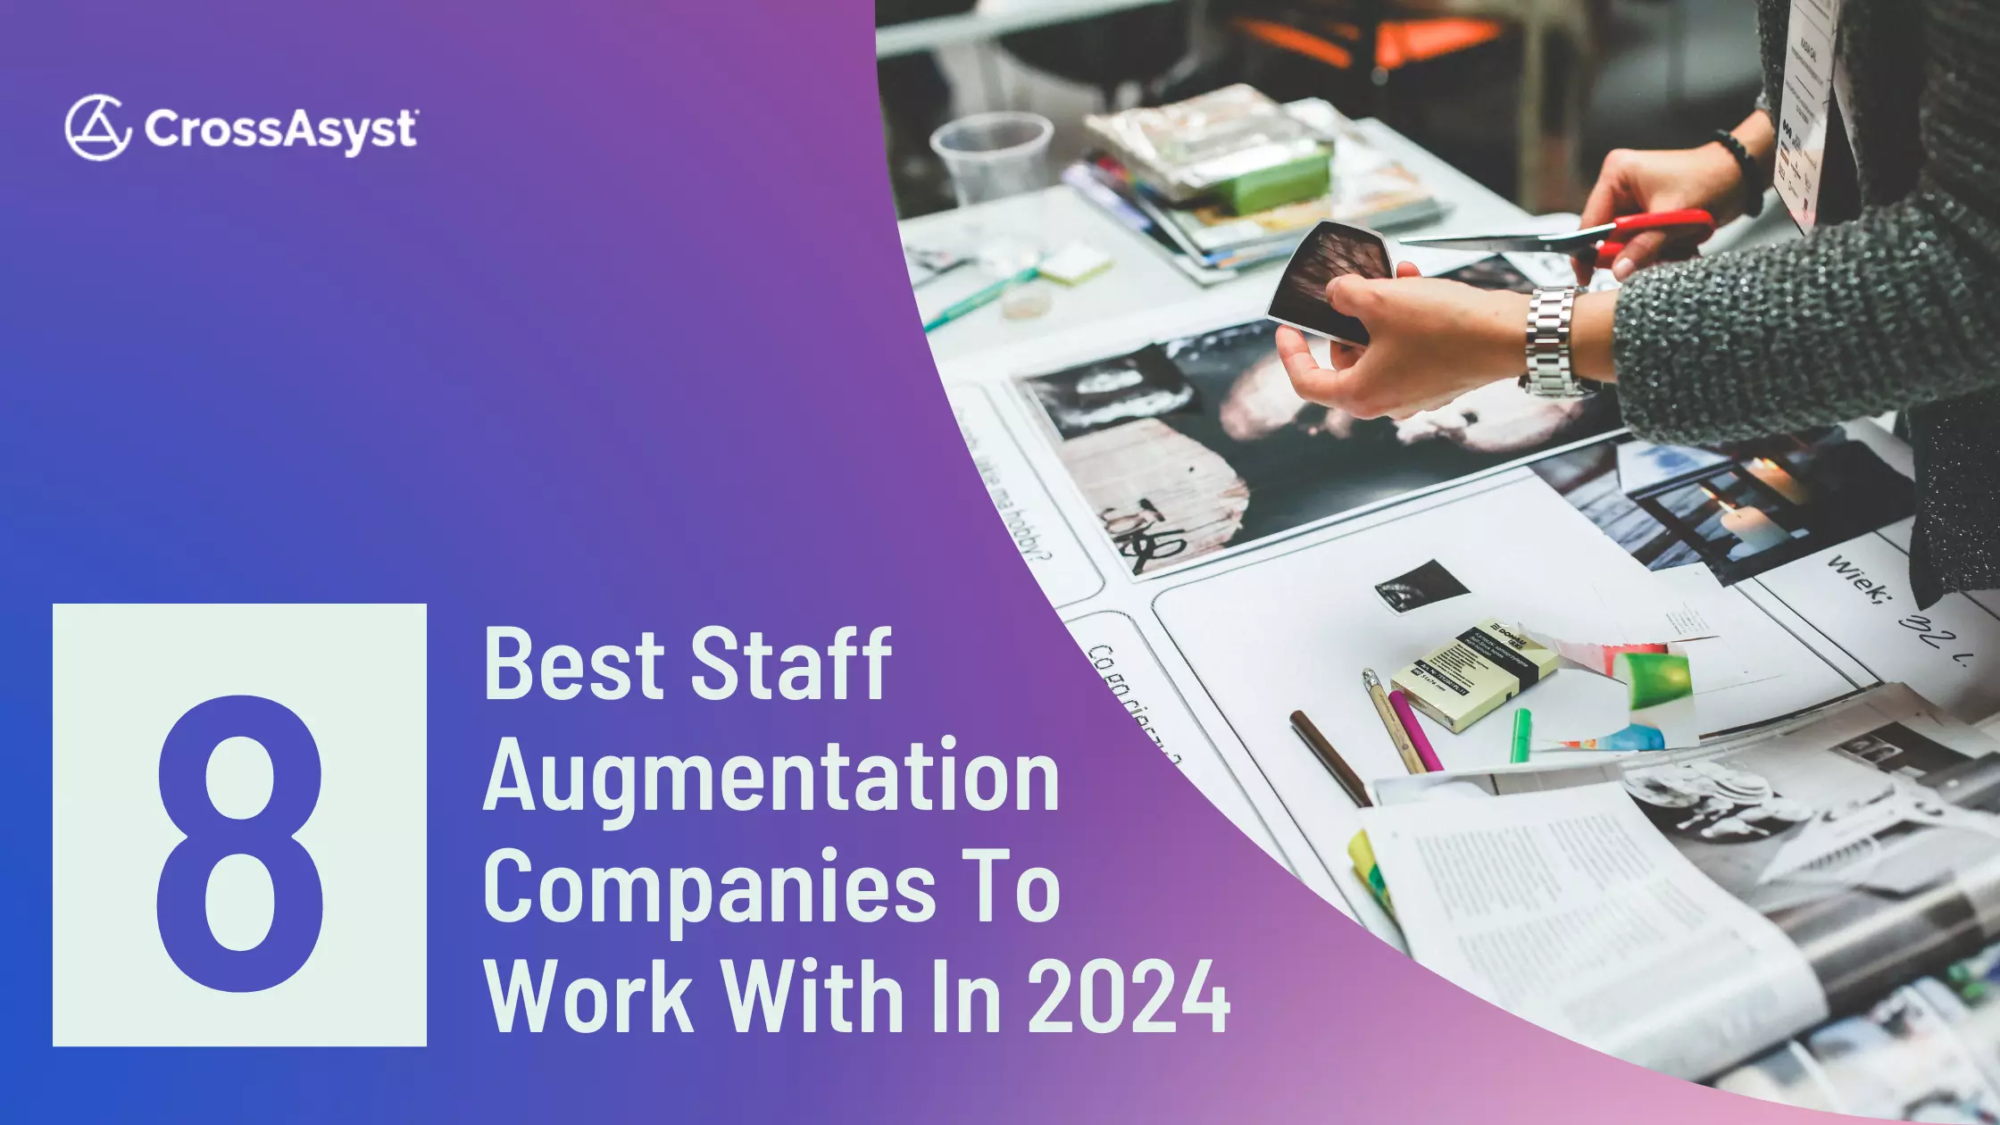 The 8 Best Staff Augmentation Companies To Work With In 2024